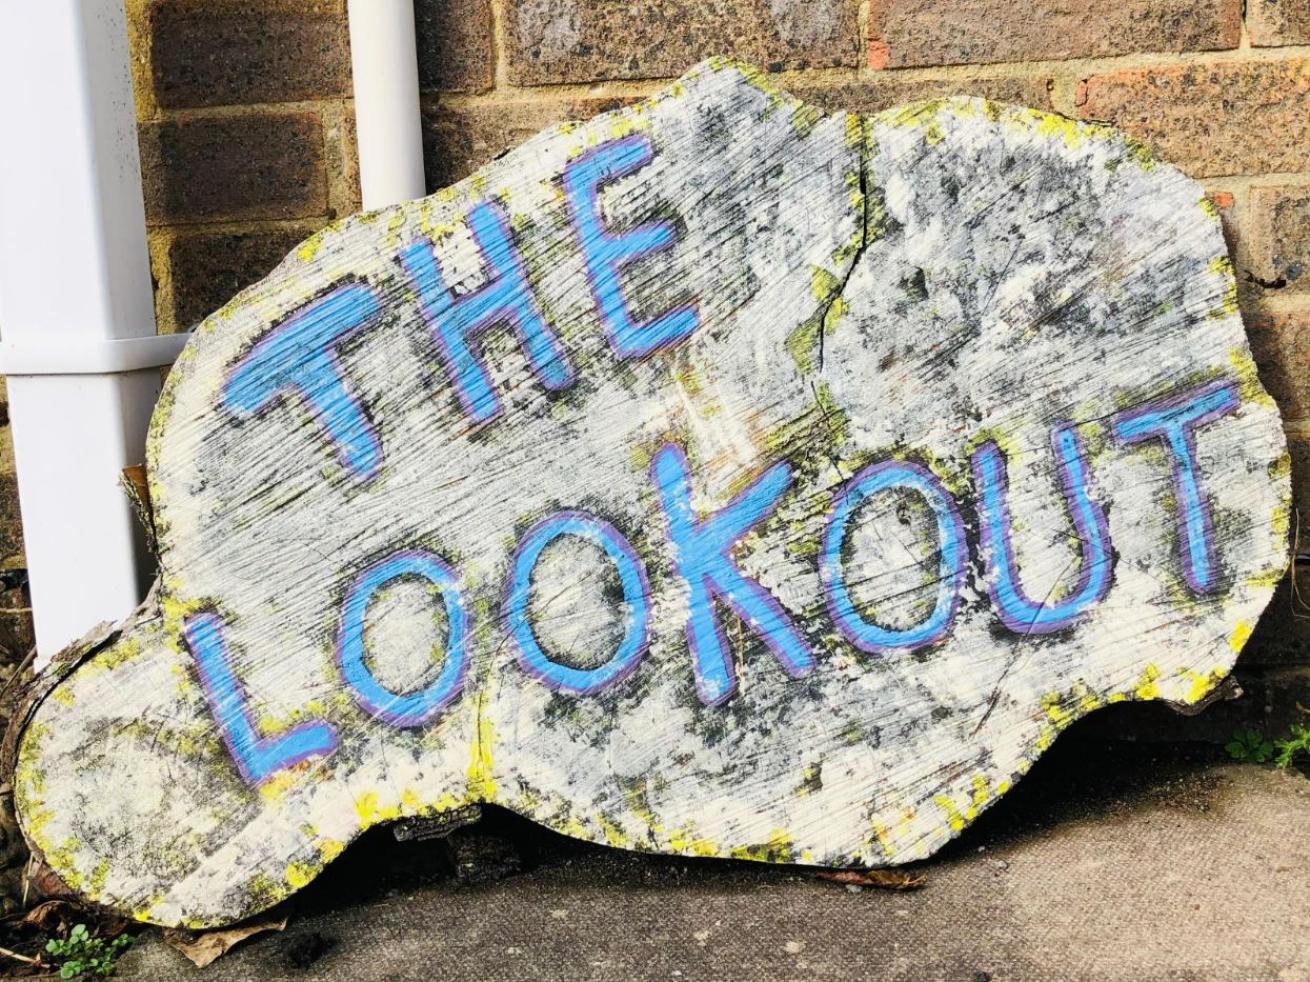 A log sign reads "The Lookout" in blue paint